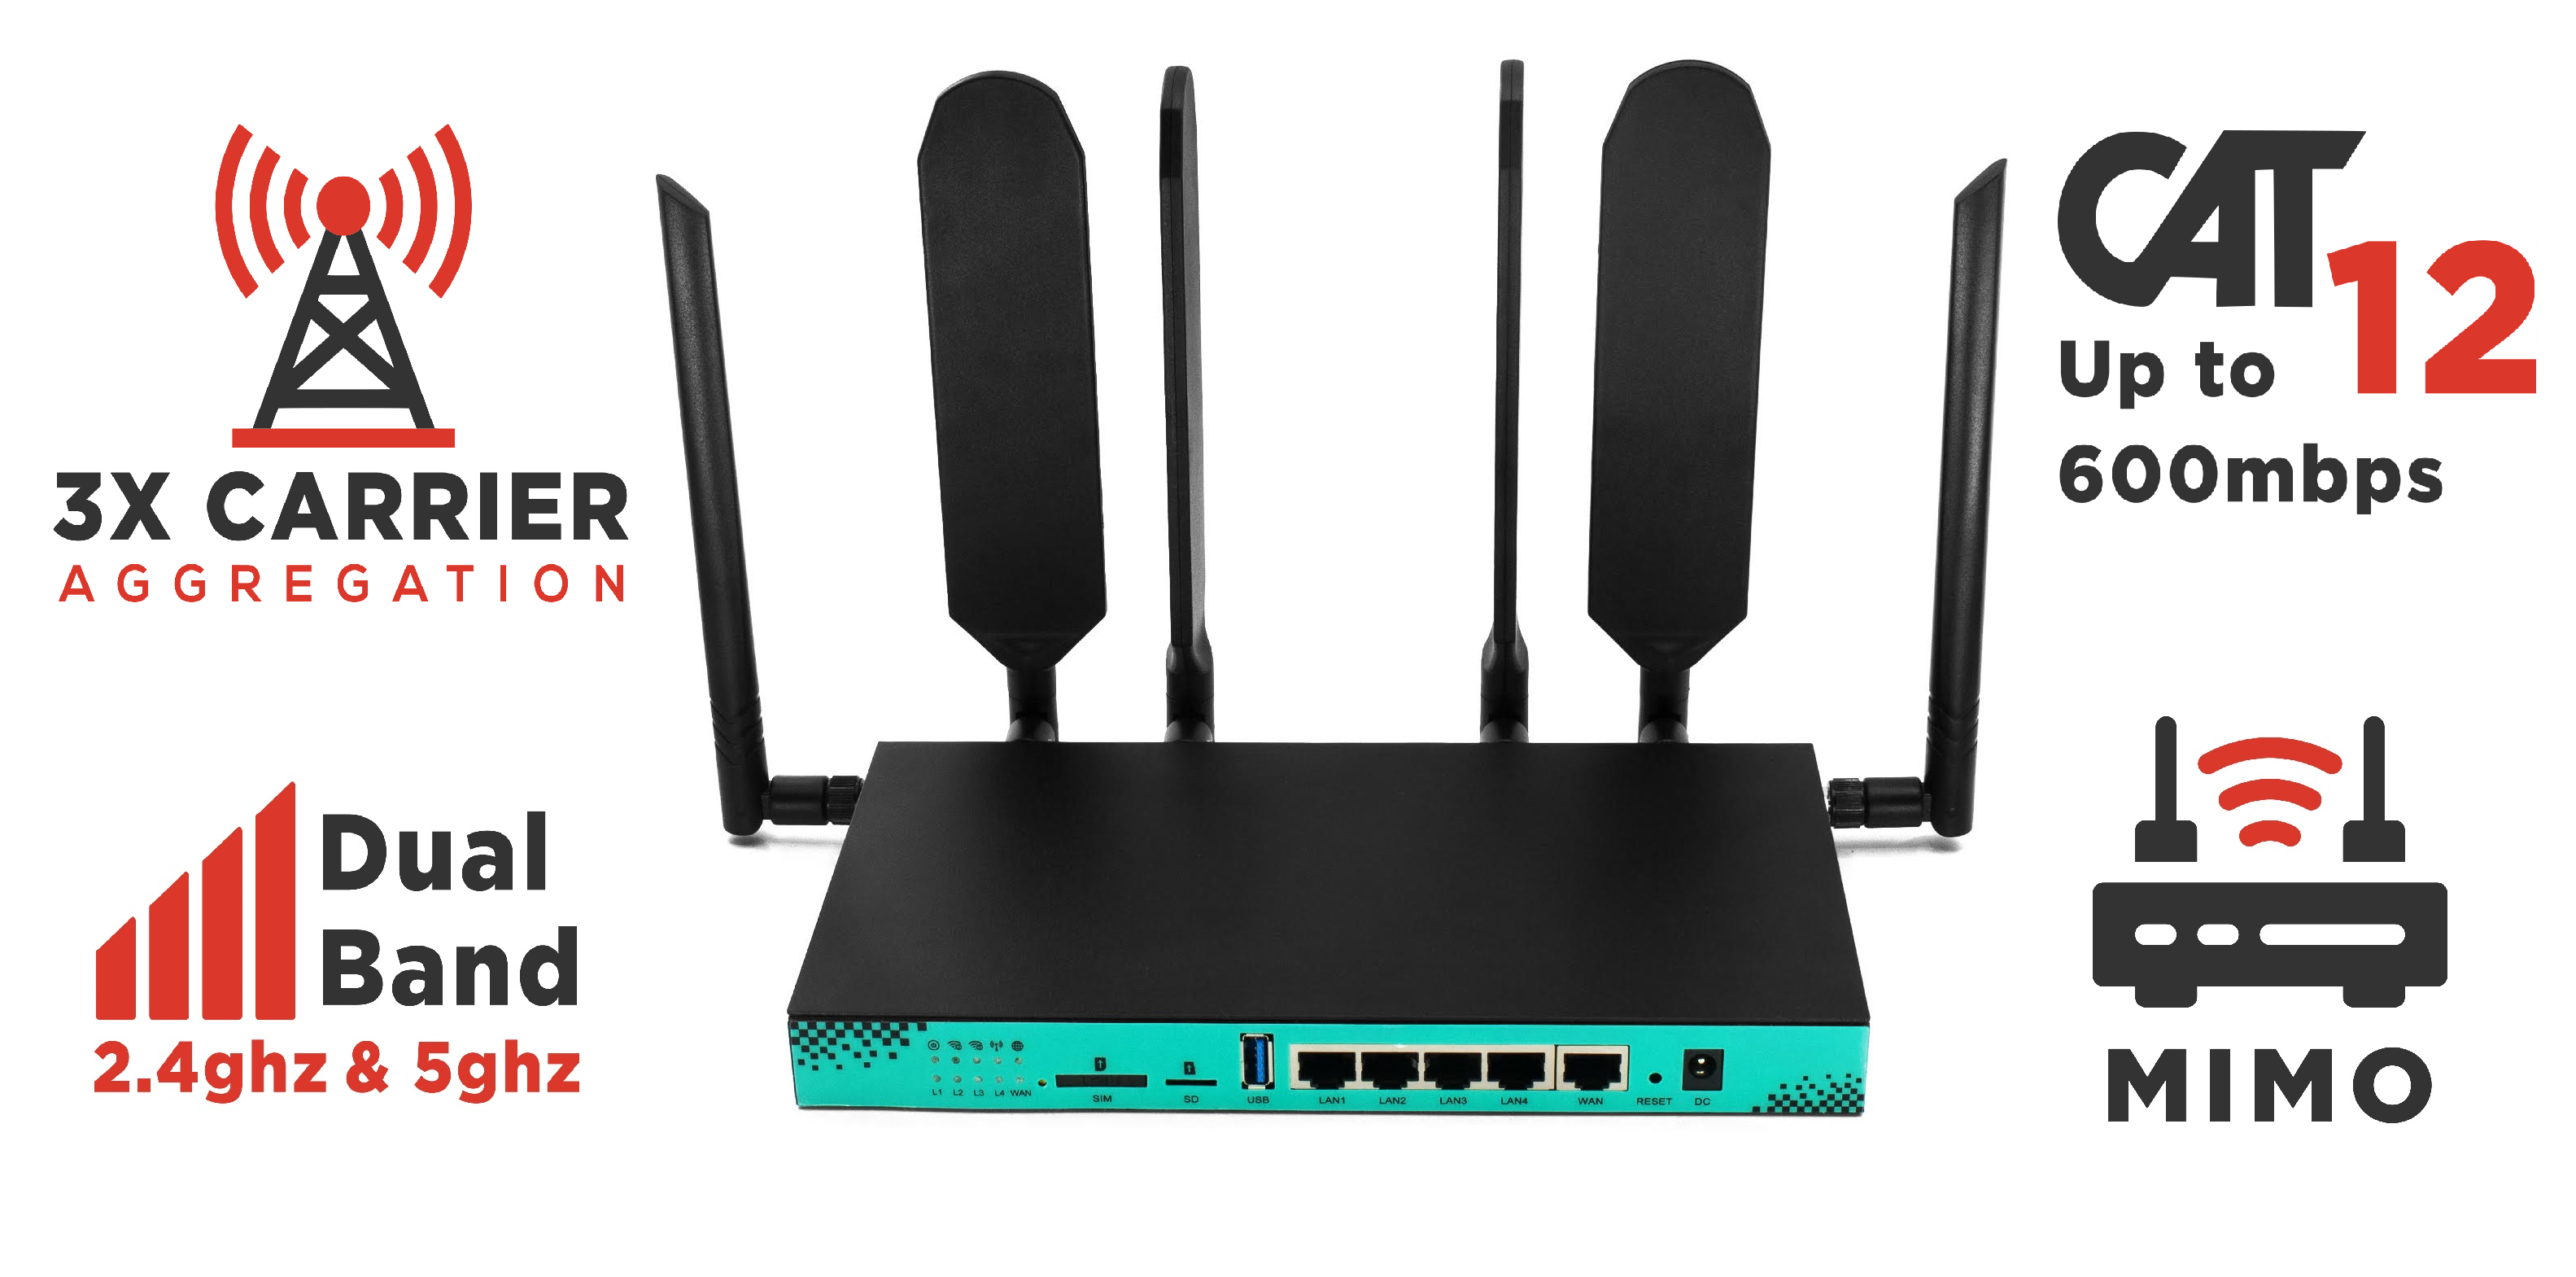 4G LTE-A Cat12 Pro Unlocked Dual-Band OpenWRT Sim Router with 3X – Taktikalnetwork.com